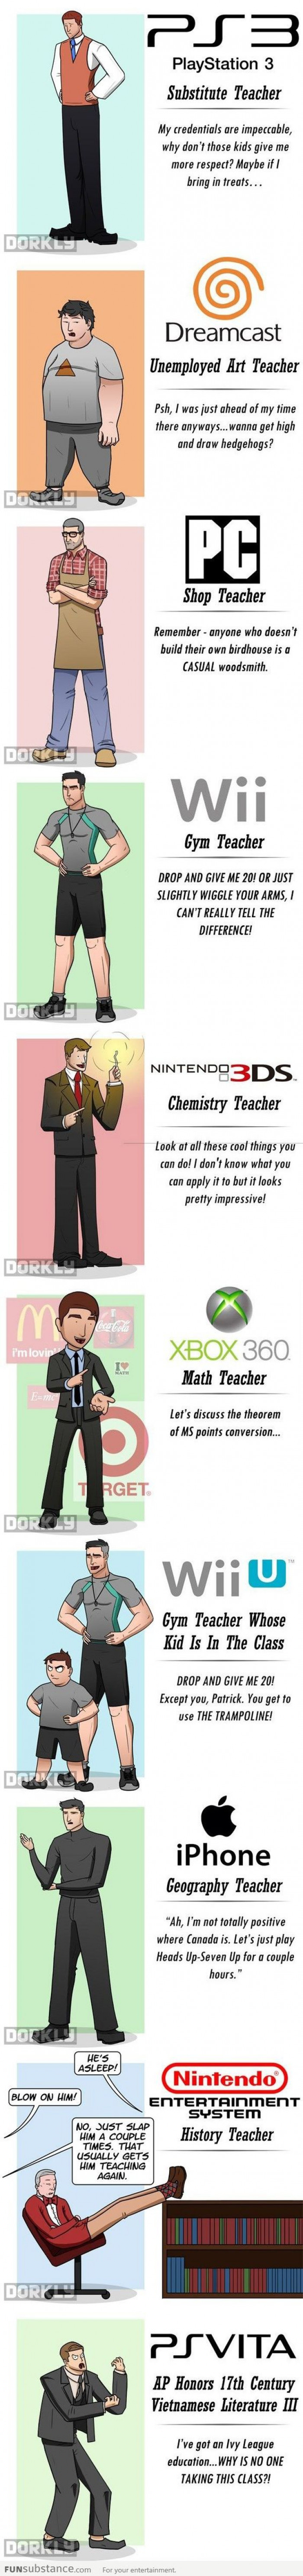 If Videogame Consoles Were Your Teachers